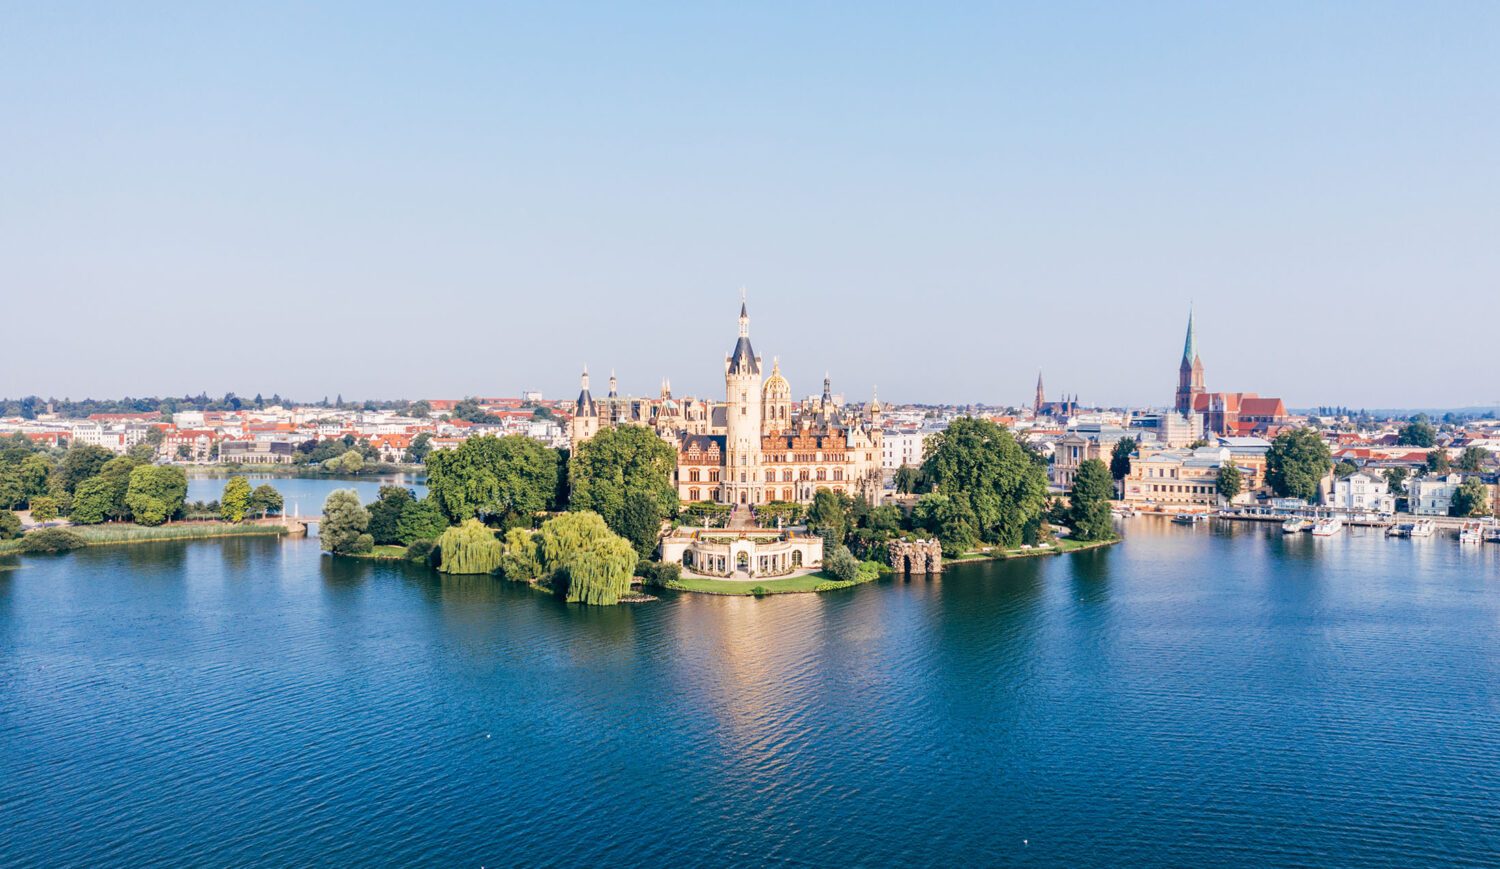 The castle is located directly in the center of Schwerin and therefore easy to reach on foot